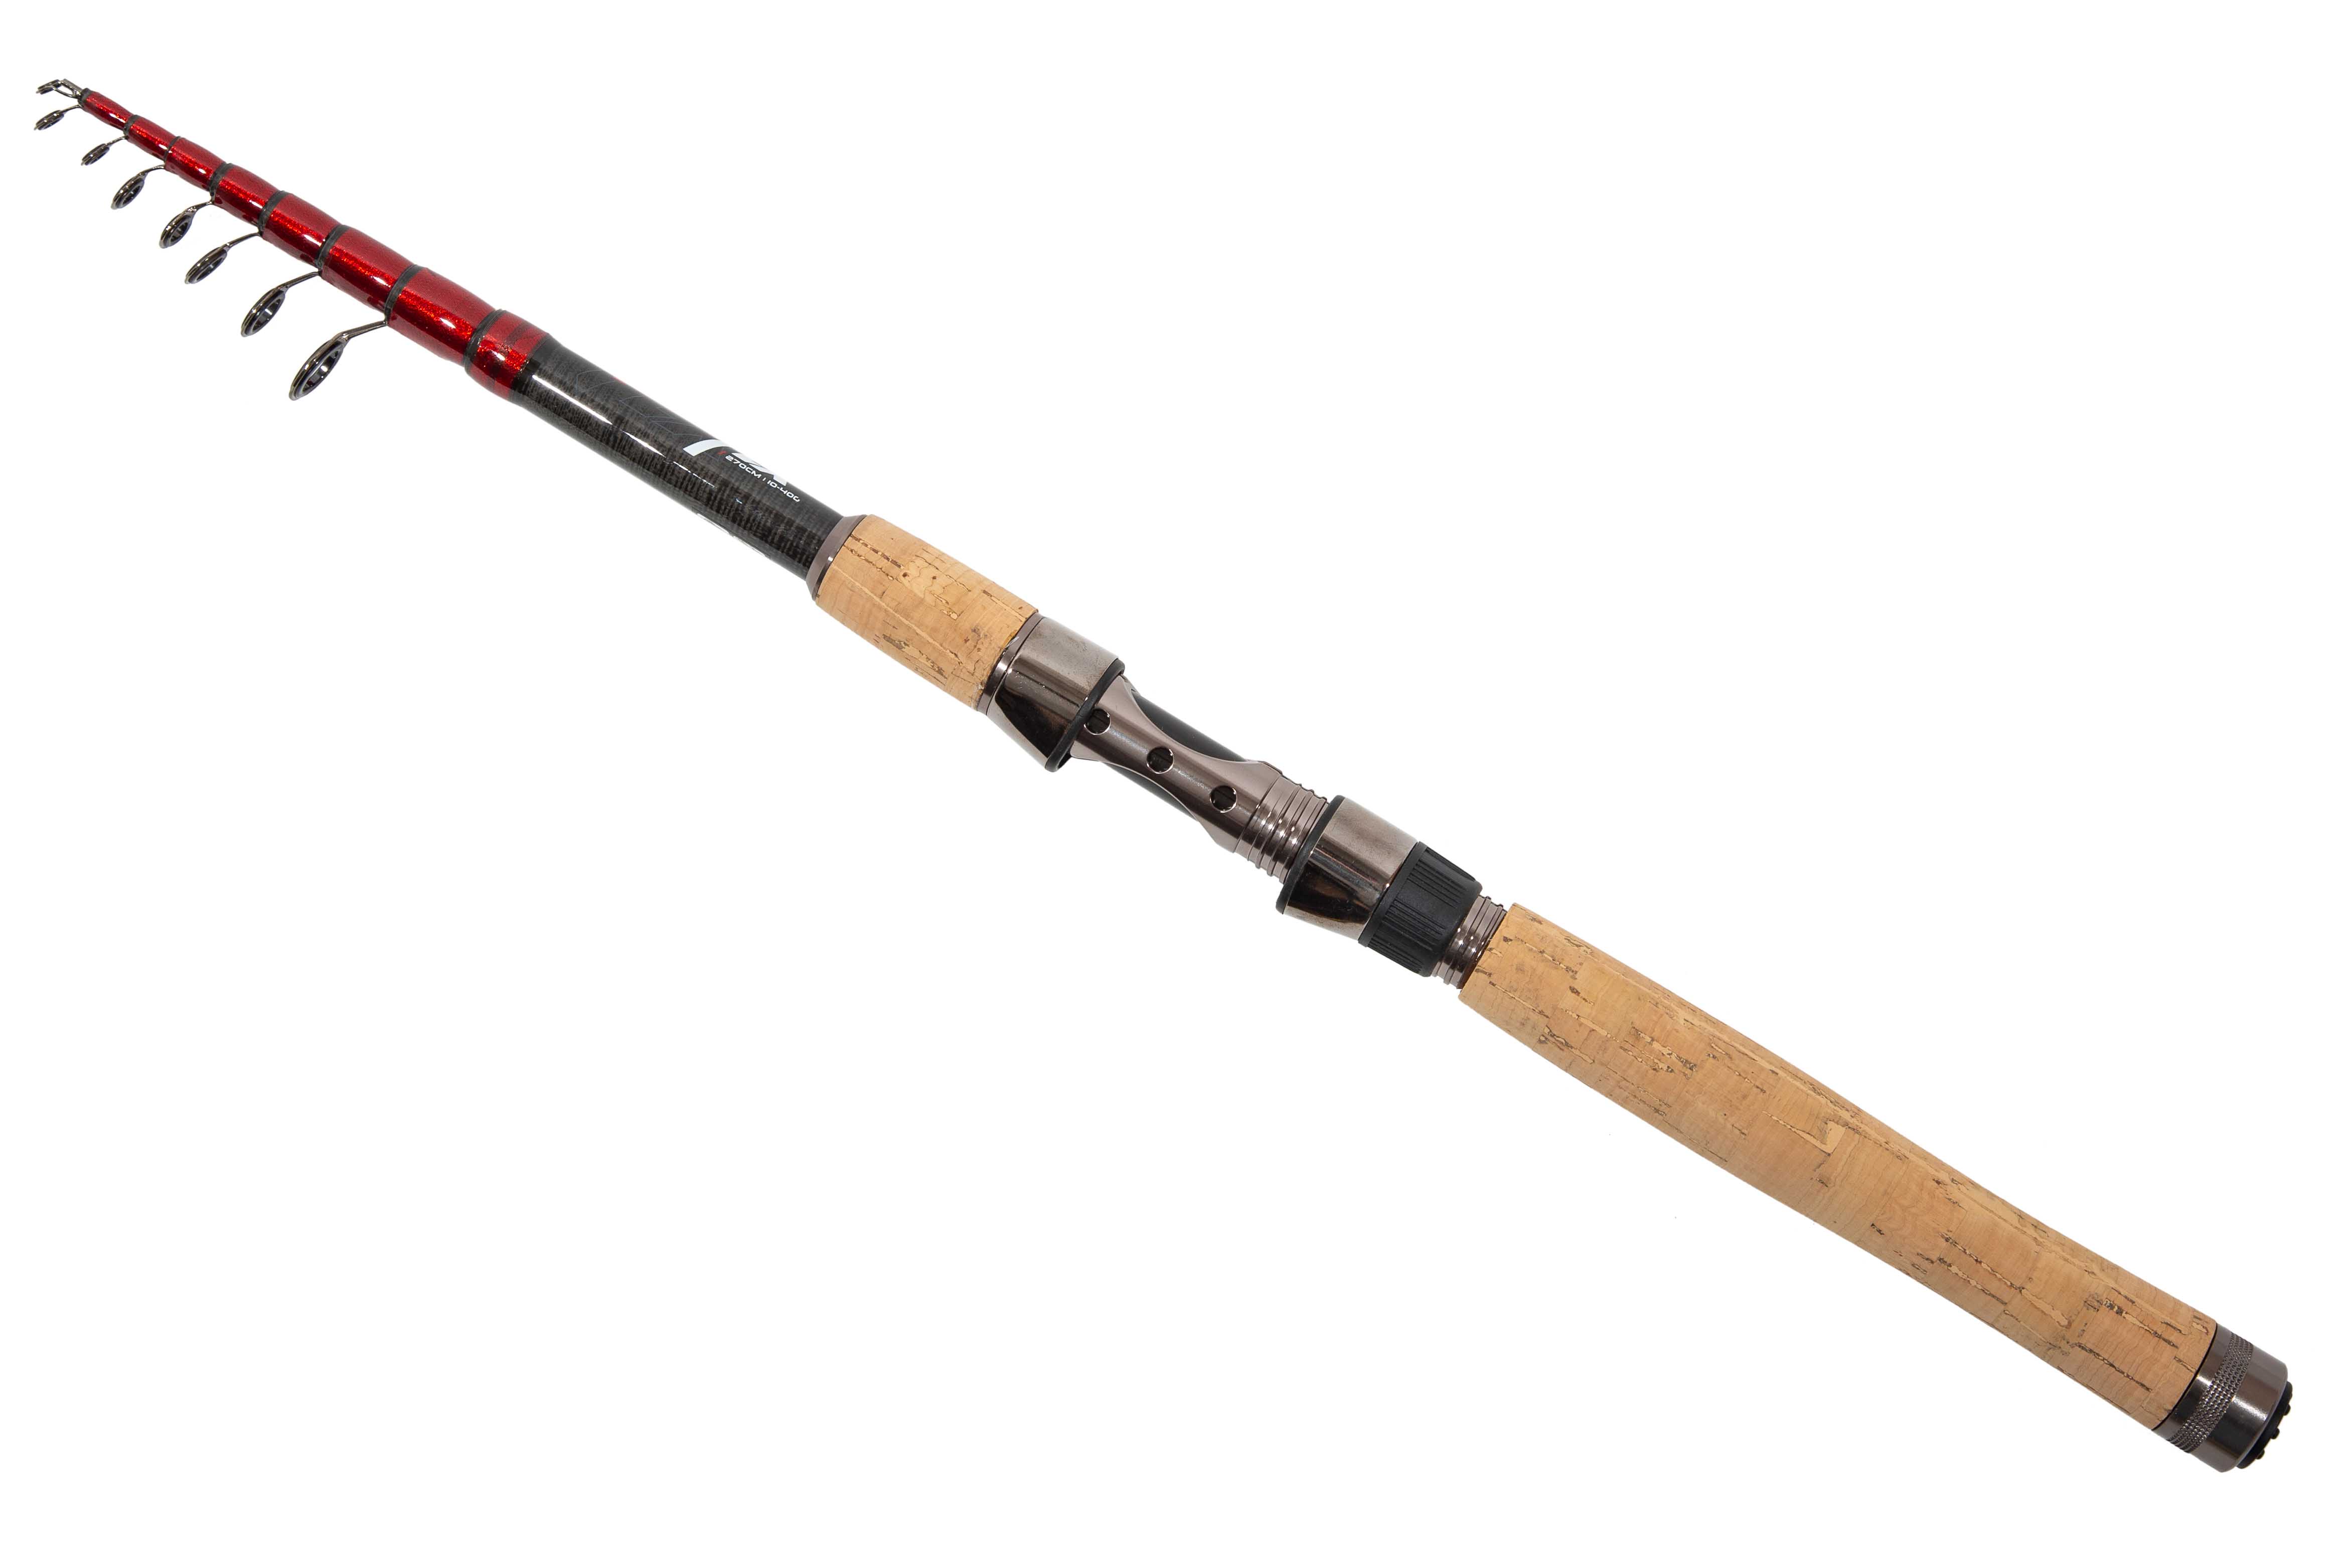 Ultimate TLX Telescopic Spin Rod